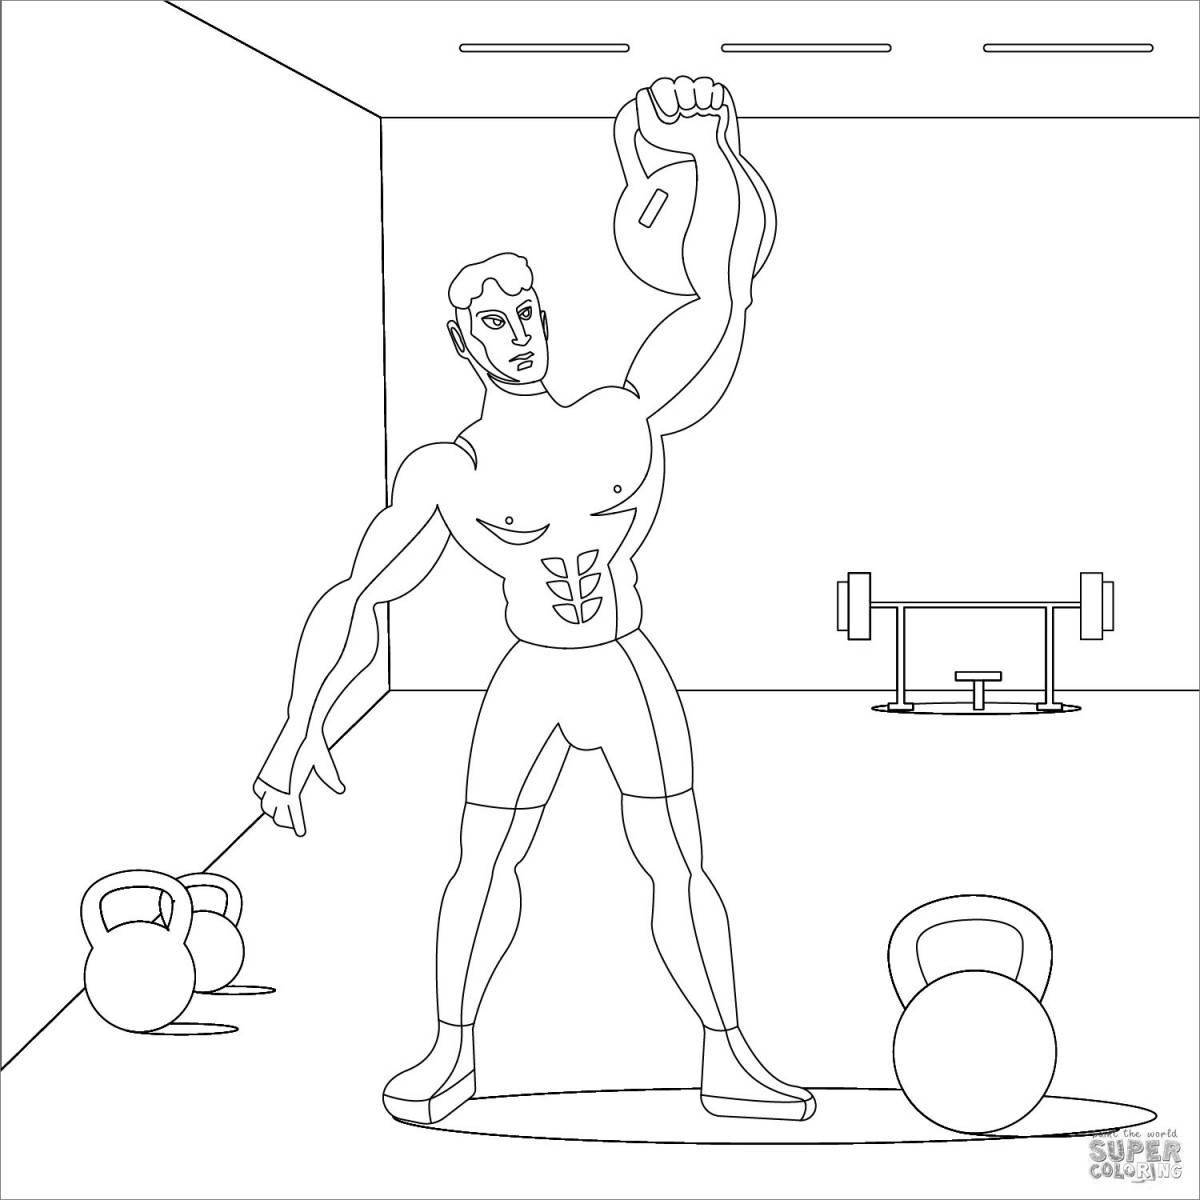 Powerful weightlifter coloring page